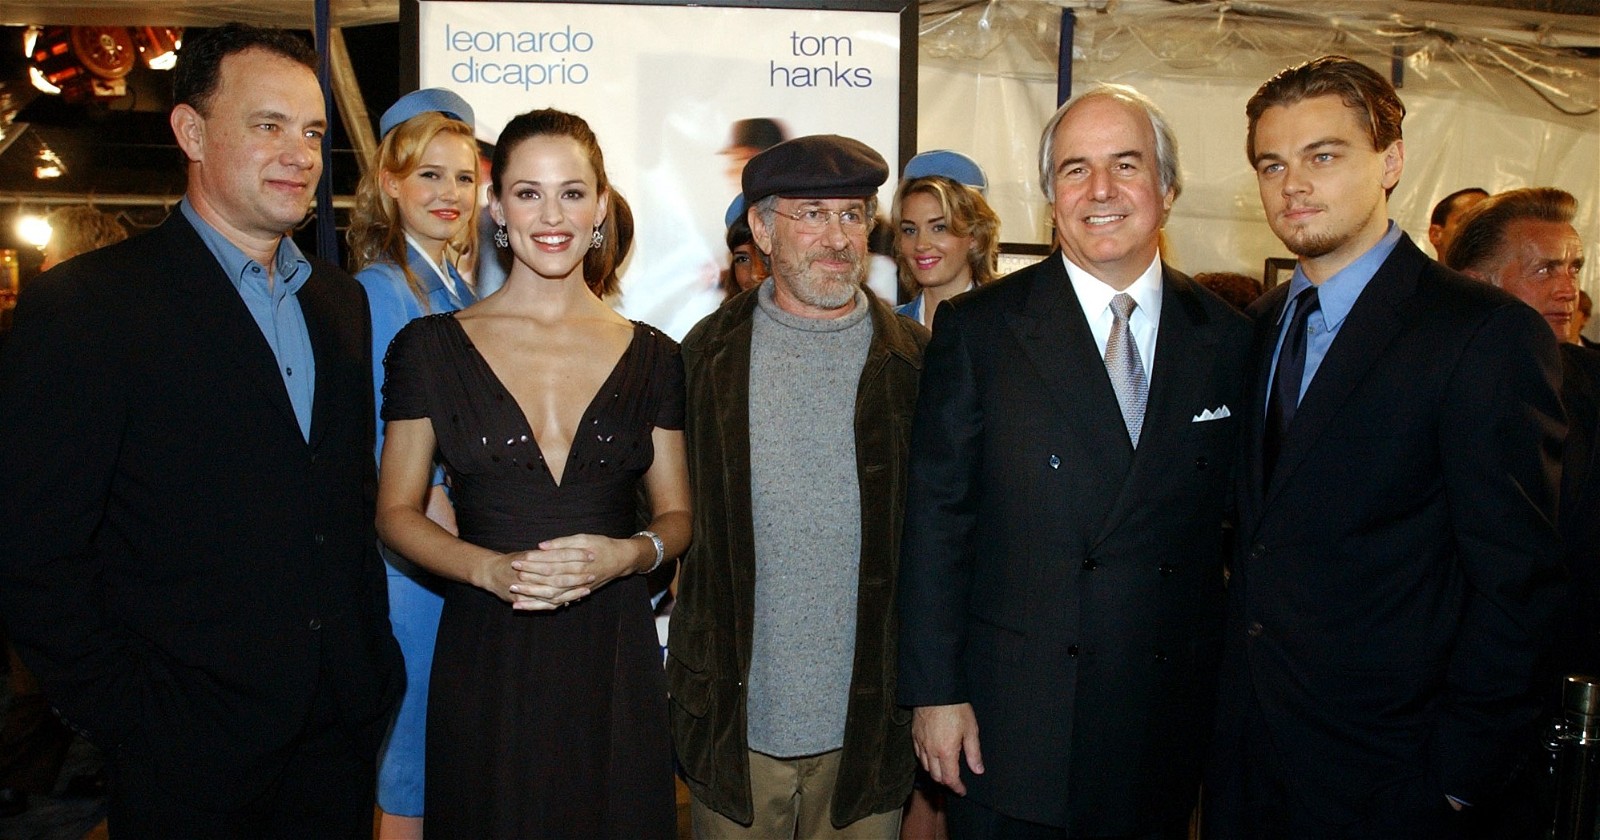 The cast of the film with Frank Abagnale Jr